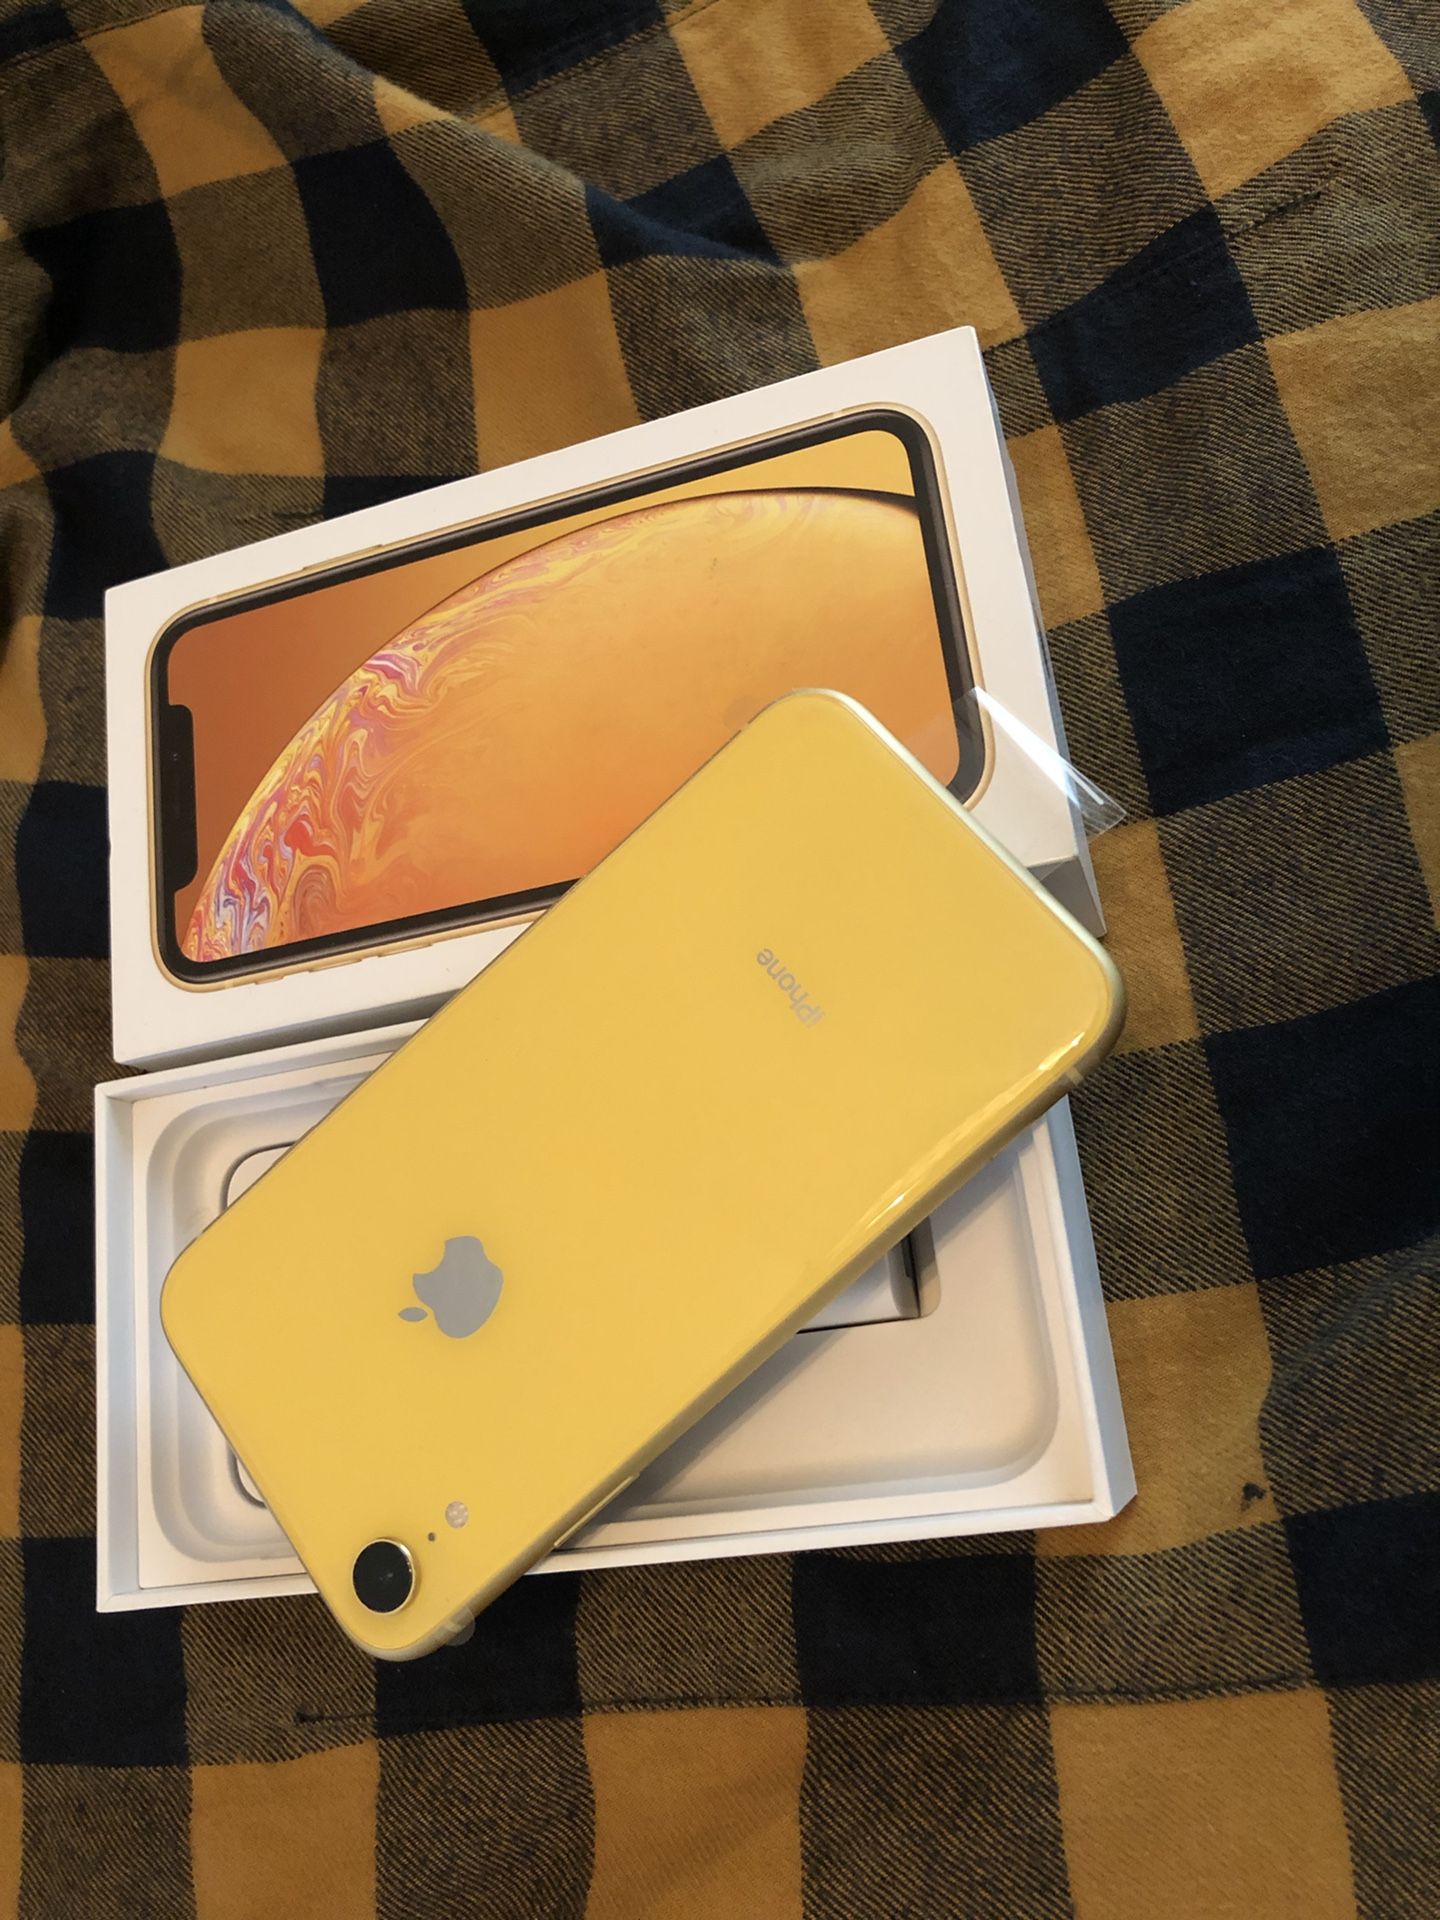 Apple iPhone 10R yellow unlocked brand new I can deliver too